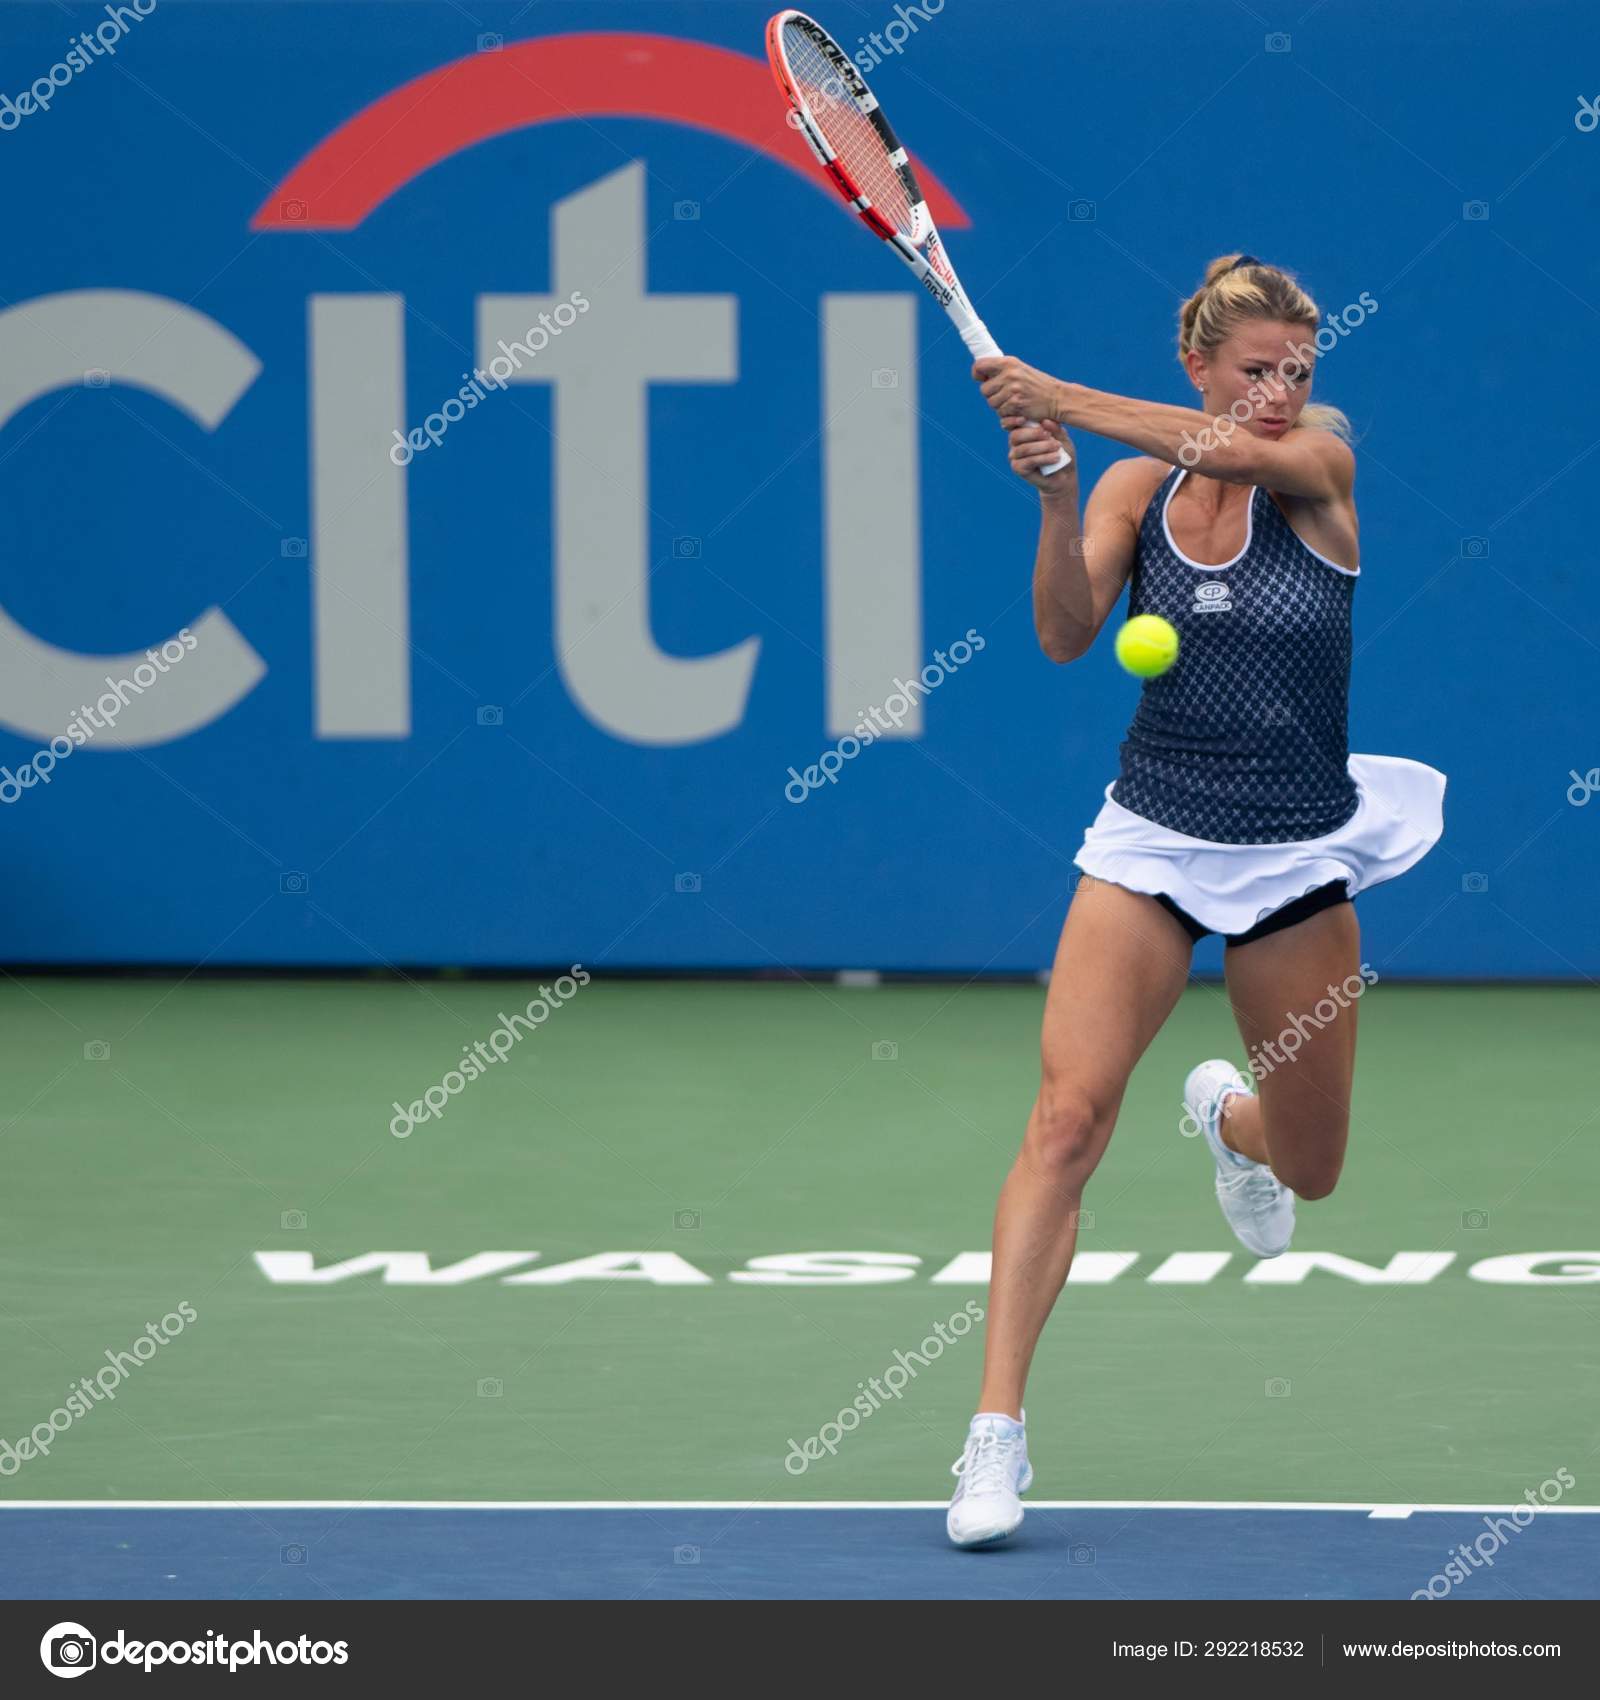 Professional Tennis Player Camila Giorgi During Third Round Match At US Open Against